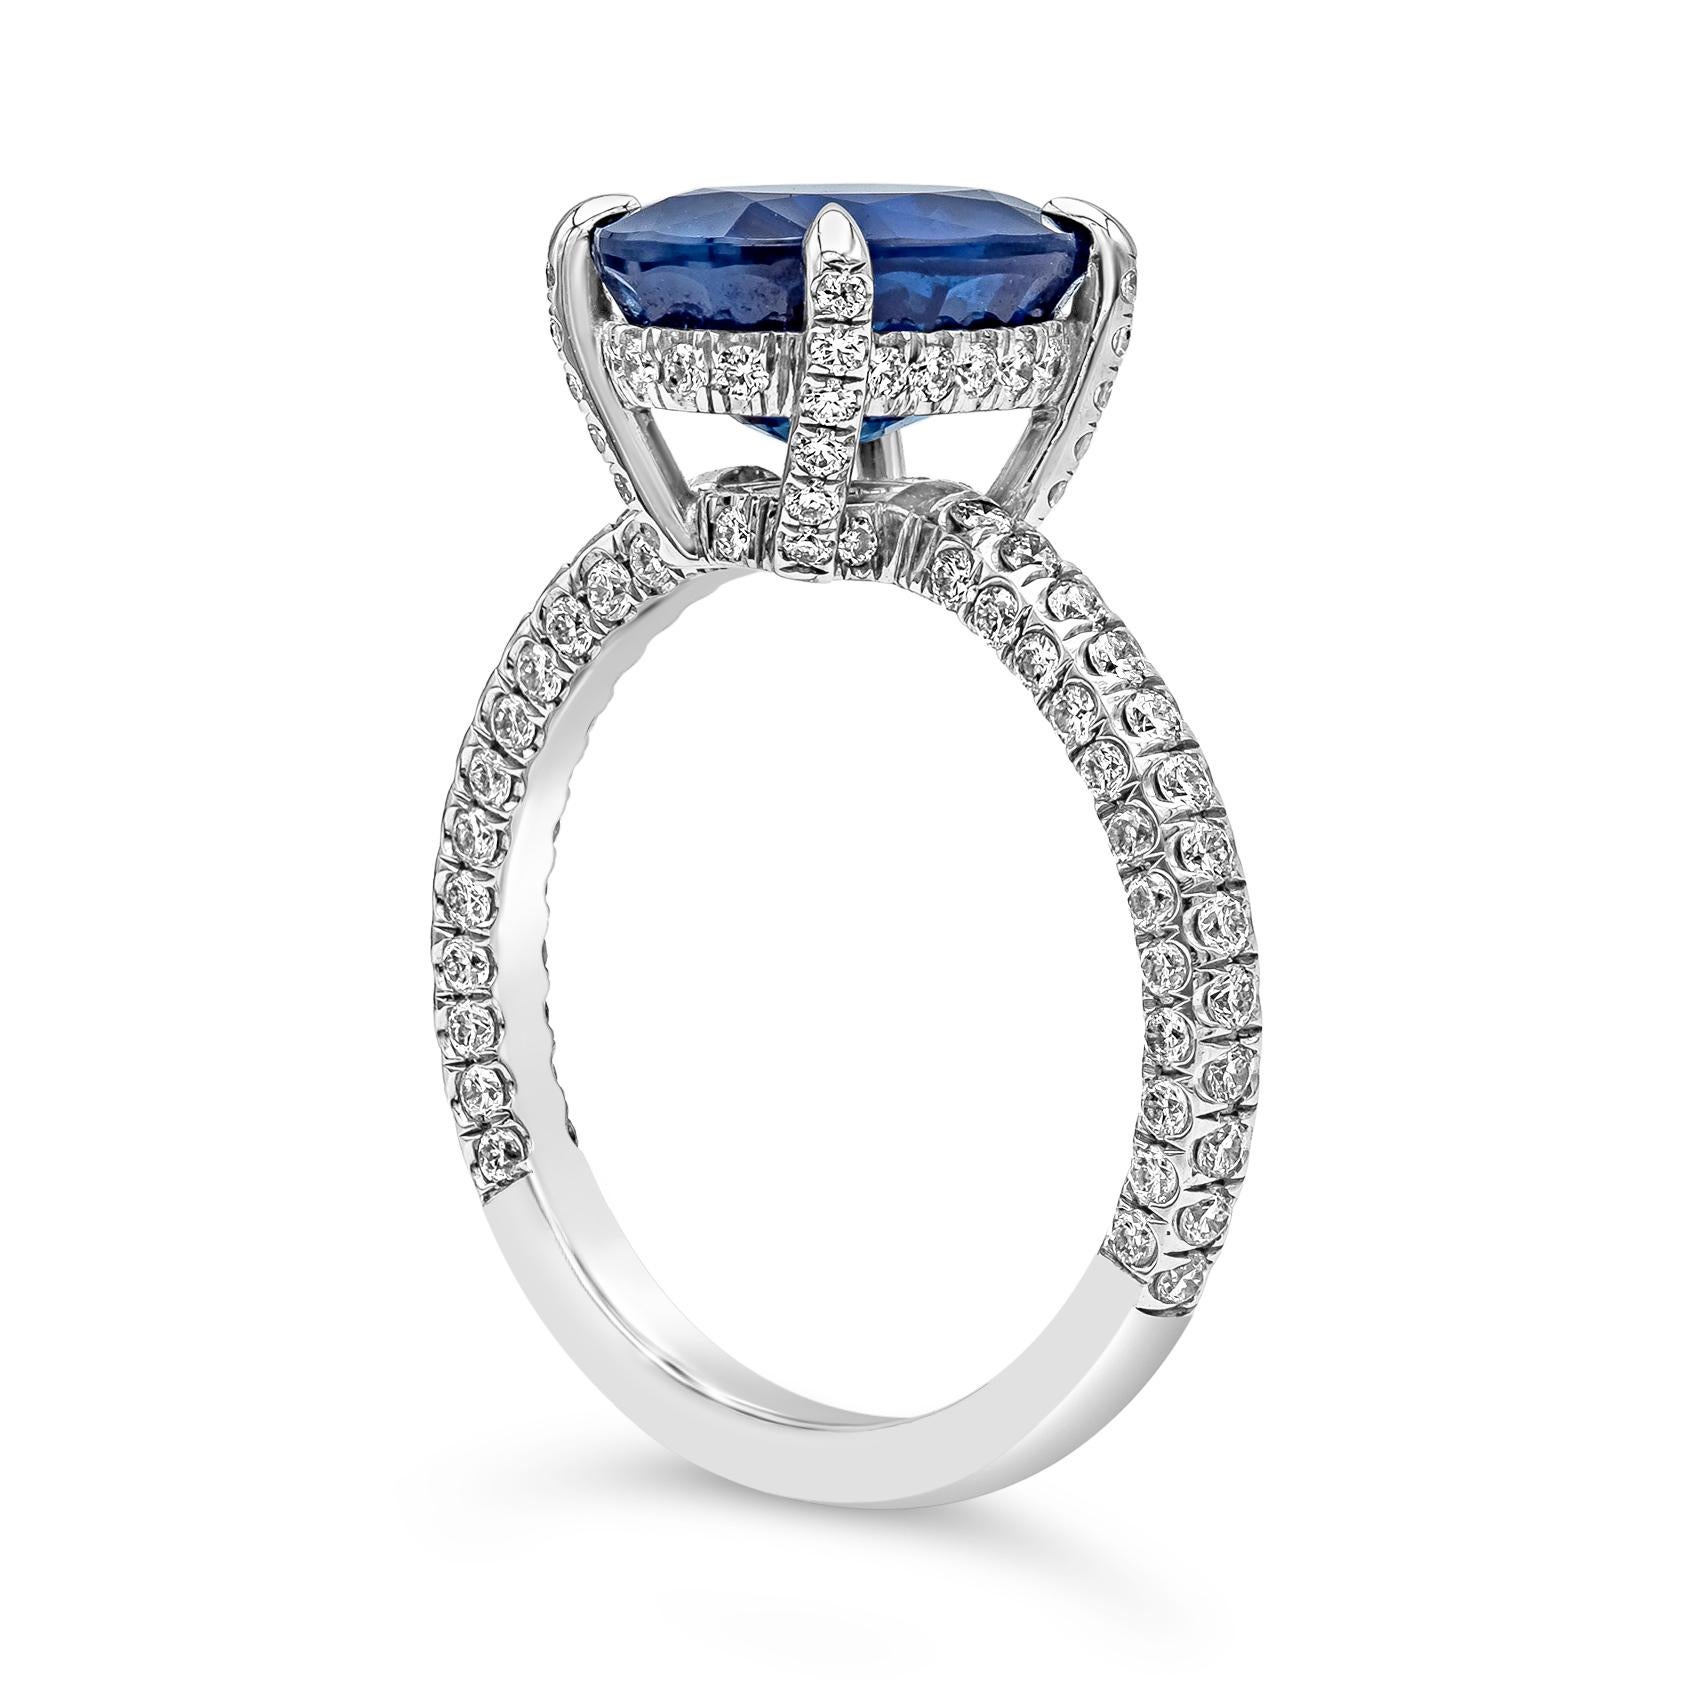 blue sapphire solitaire ring